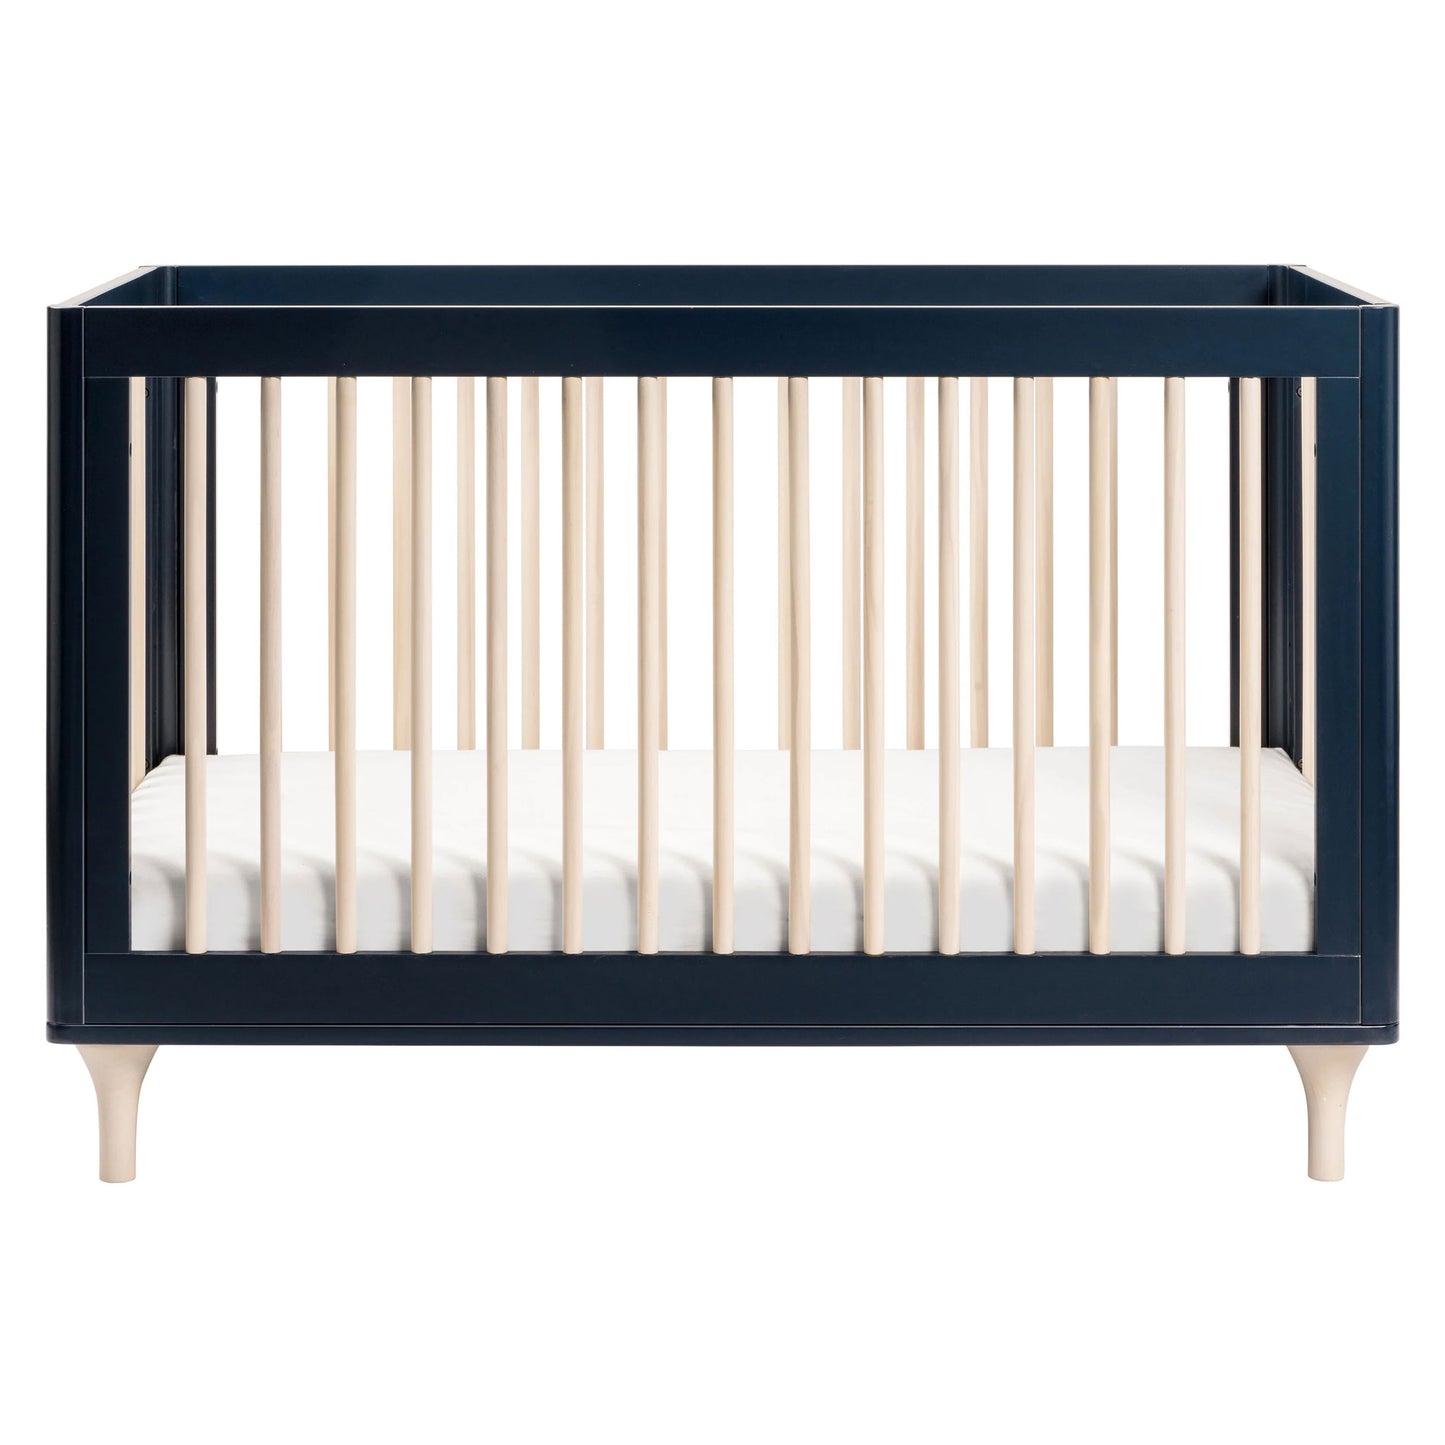 Babyletto Lolly 3-in-1 Convertible Crib with Toddler Bed Conversion Kit - Navy/Washed Natural